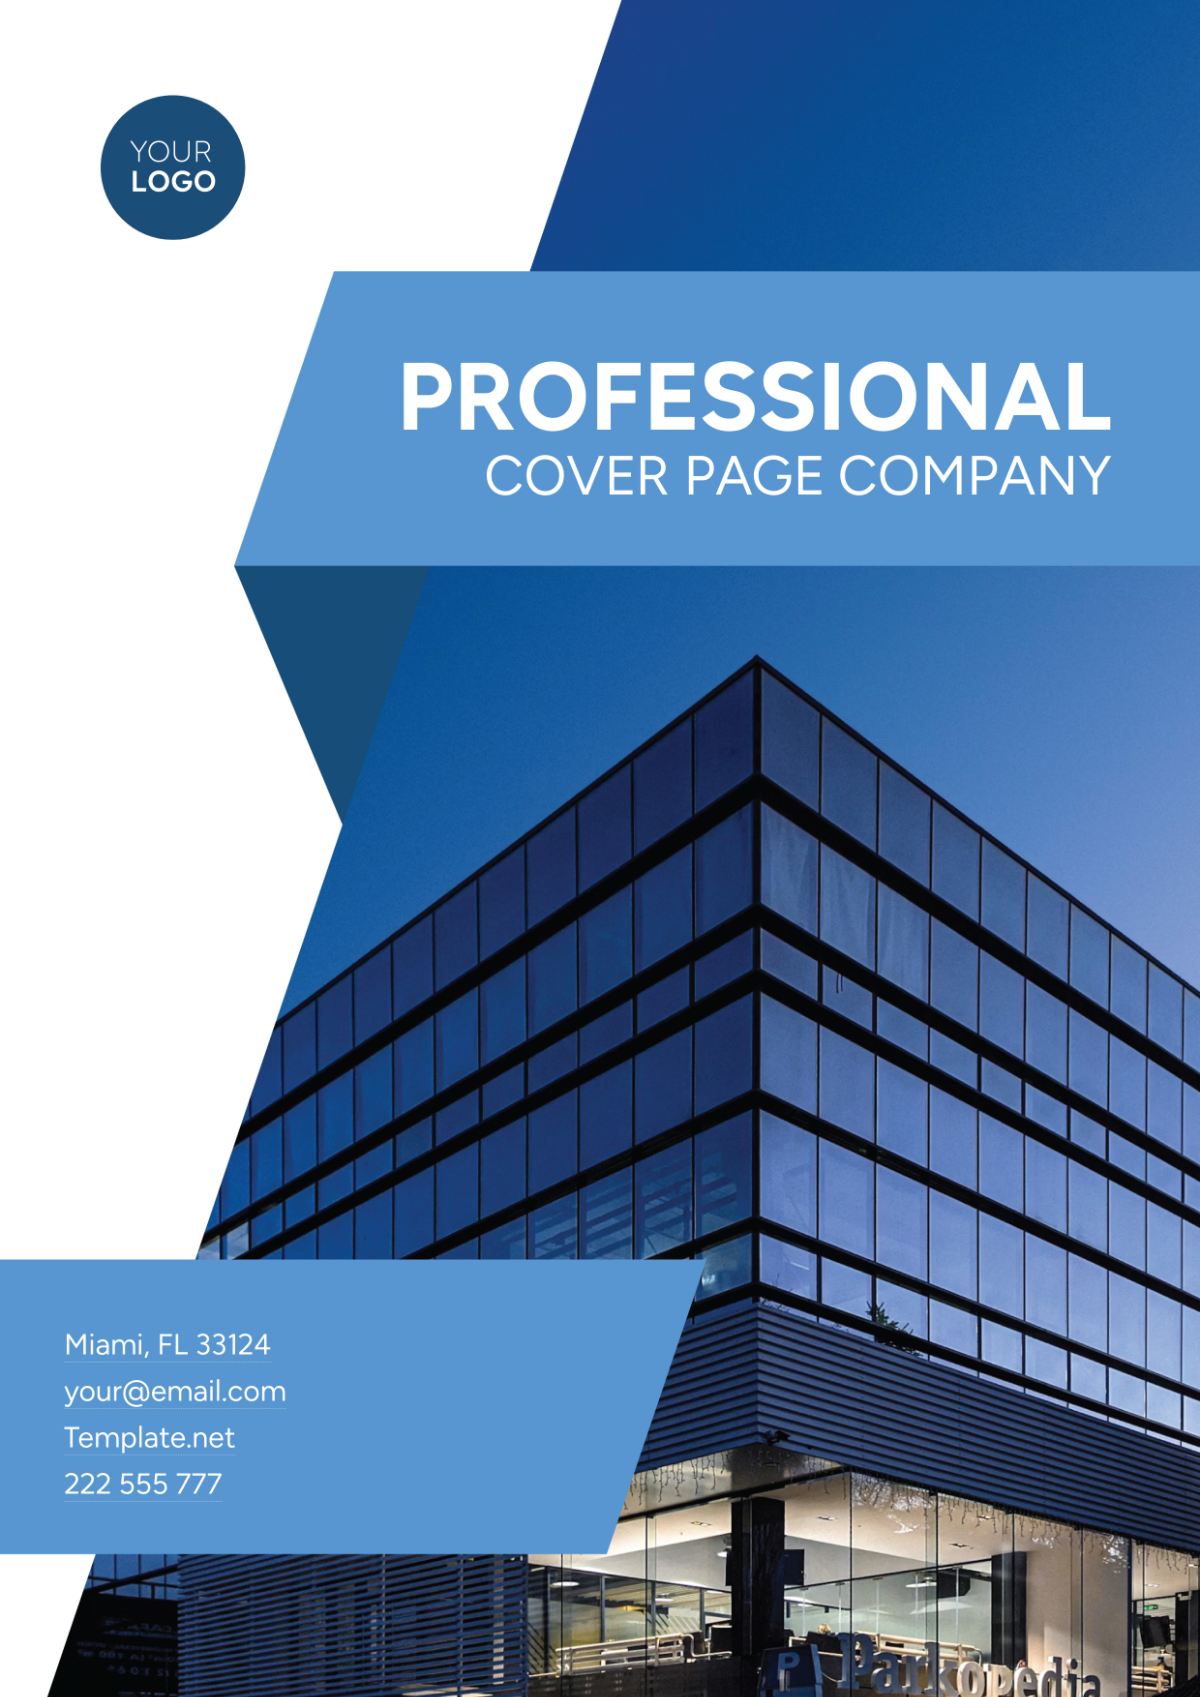 Professional Cover Page Company Template